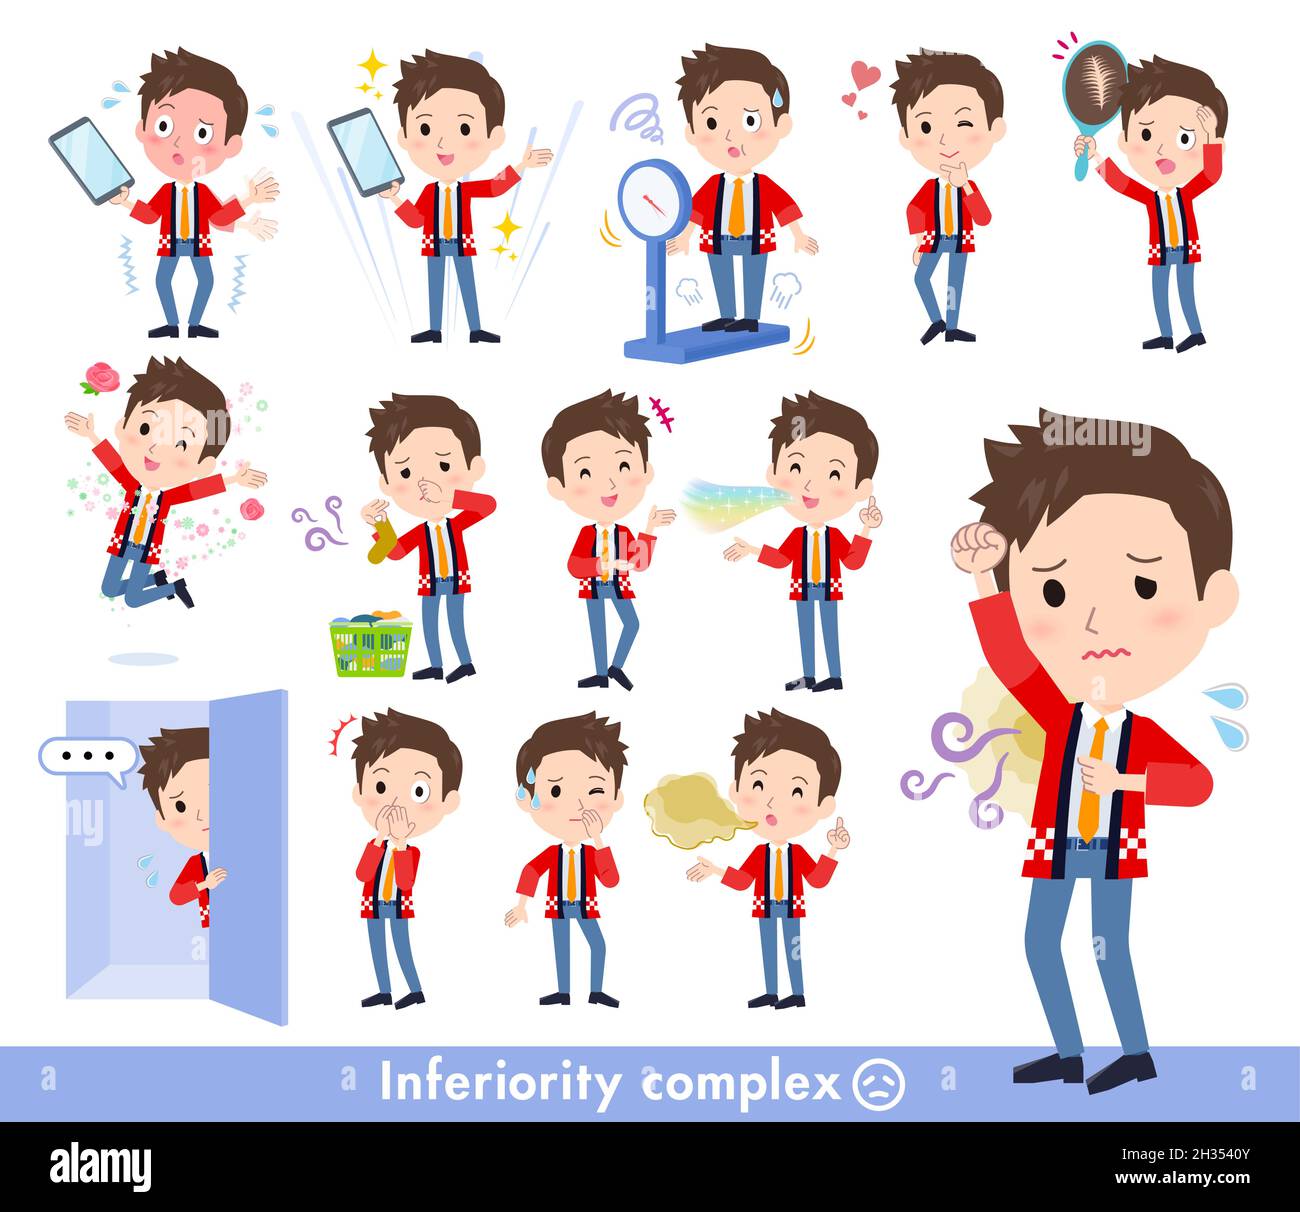 A set of wearing a happi coat man on inferiority complex.It's vector art so easy to edit. Stock Vector